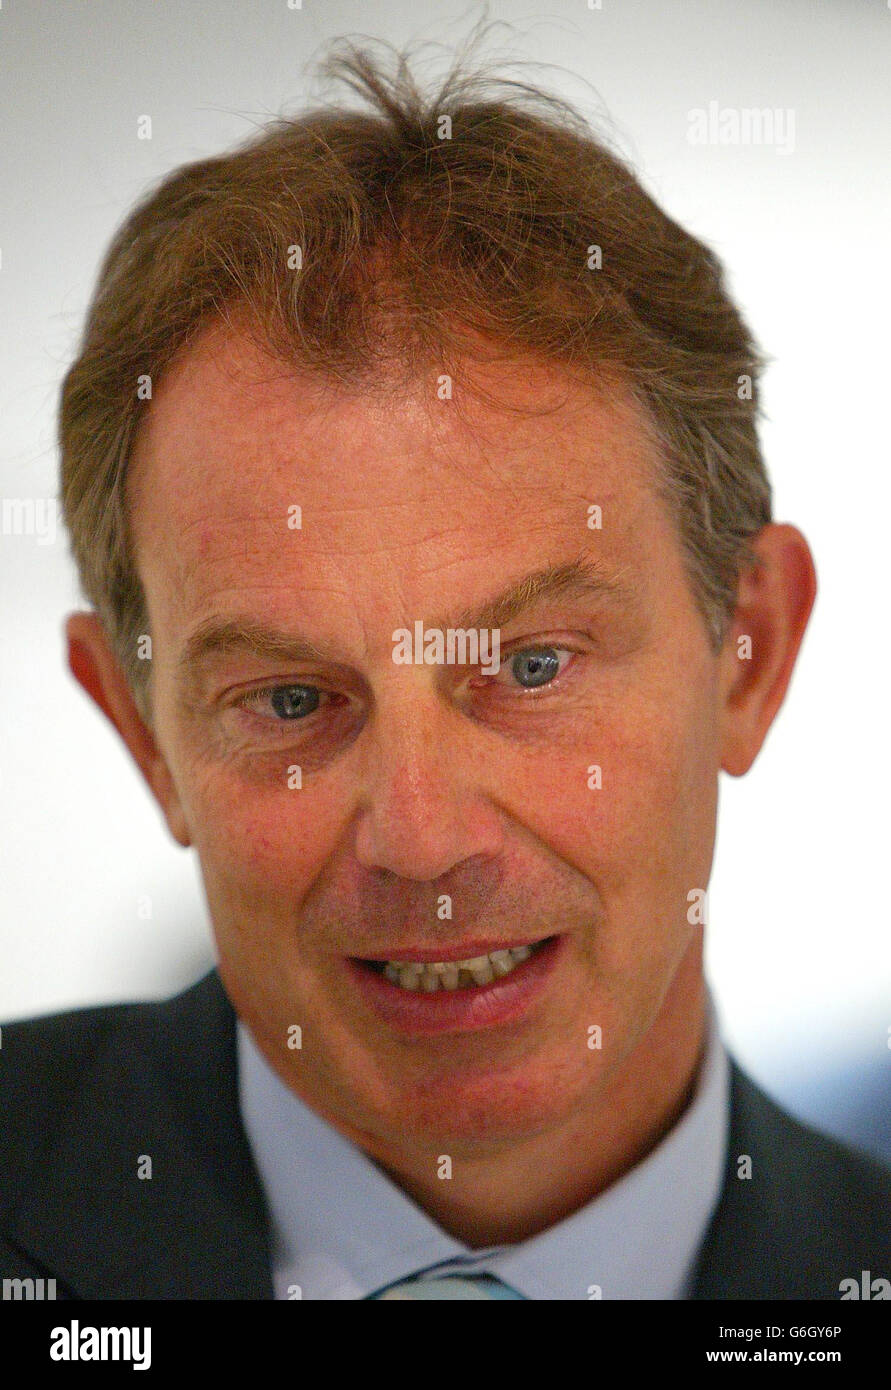 Prime Minister Tony Blair during his visit to the 60 million Golden Jubilee Wing of King's College Hospital in Denmark Hill, South London. The wing, which opened last year ahead of schedule, was built using the controversial Private Finance Initiative opposed by some unions. Asked after his visit whether he condoned Mr Campbell's behaviour over the David Kelly affair, Mr Blair told reporters: 'I totally understand why you people want to ask me about the Hutton Inquiry but let that inquiry take place. Meanwhile let us get on with doing other things, for example in the NHS here.' Stock Photo